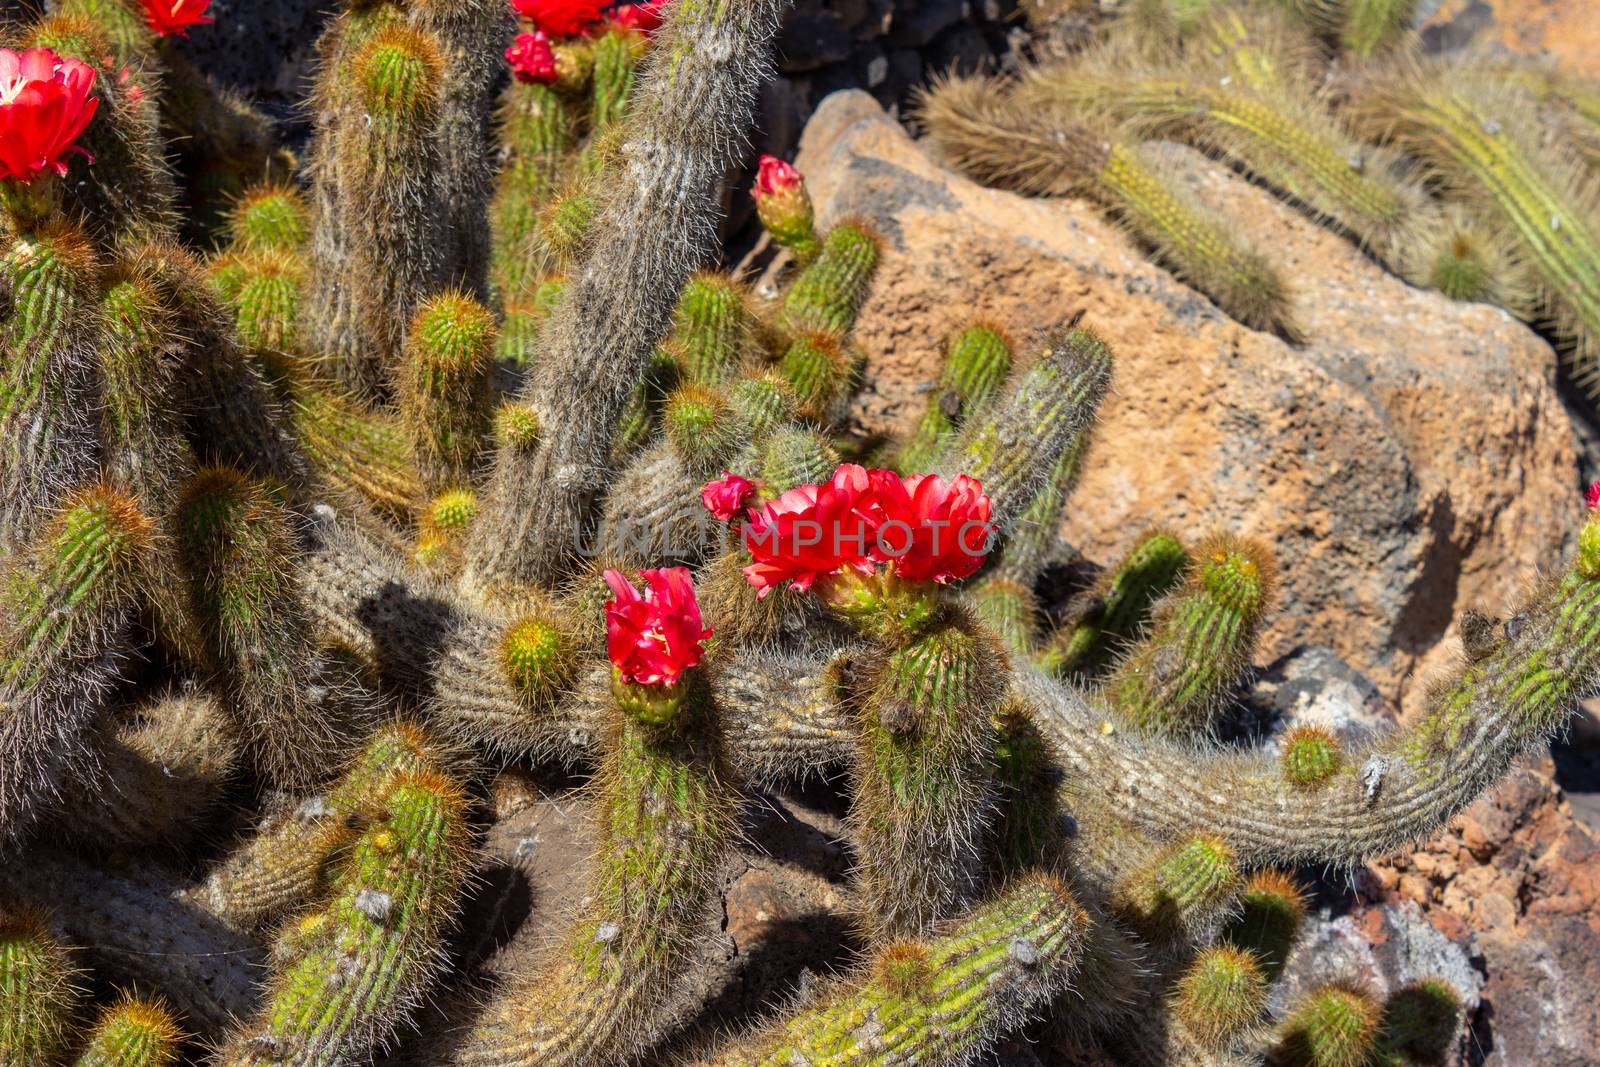 Cactus with red blossom in Jardin de Cactus by Cesar Manrique on by reinerc